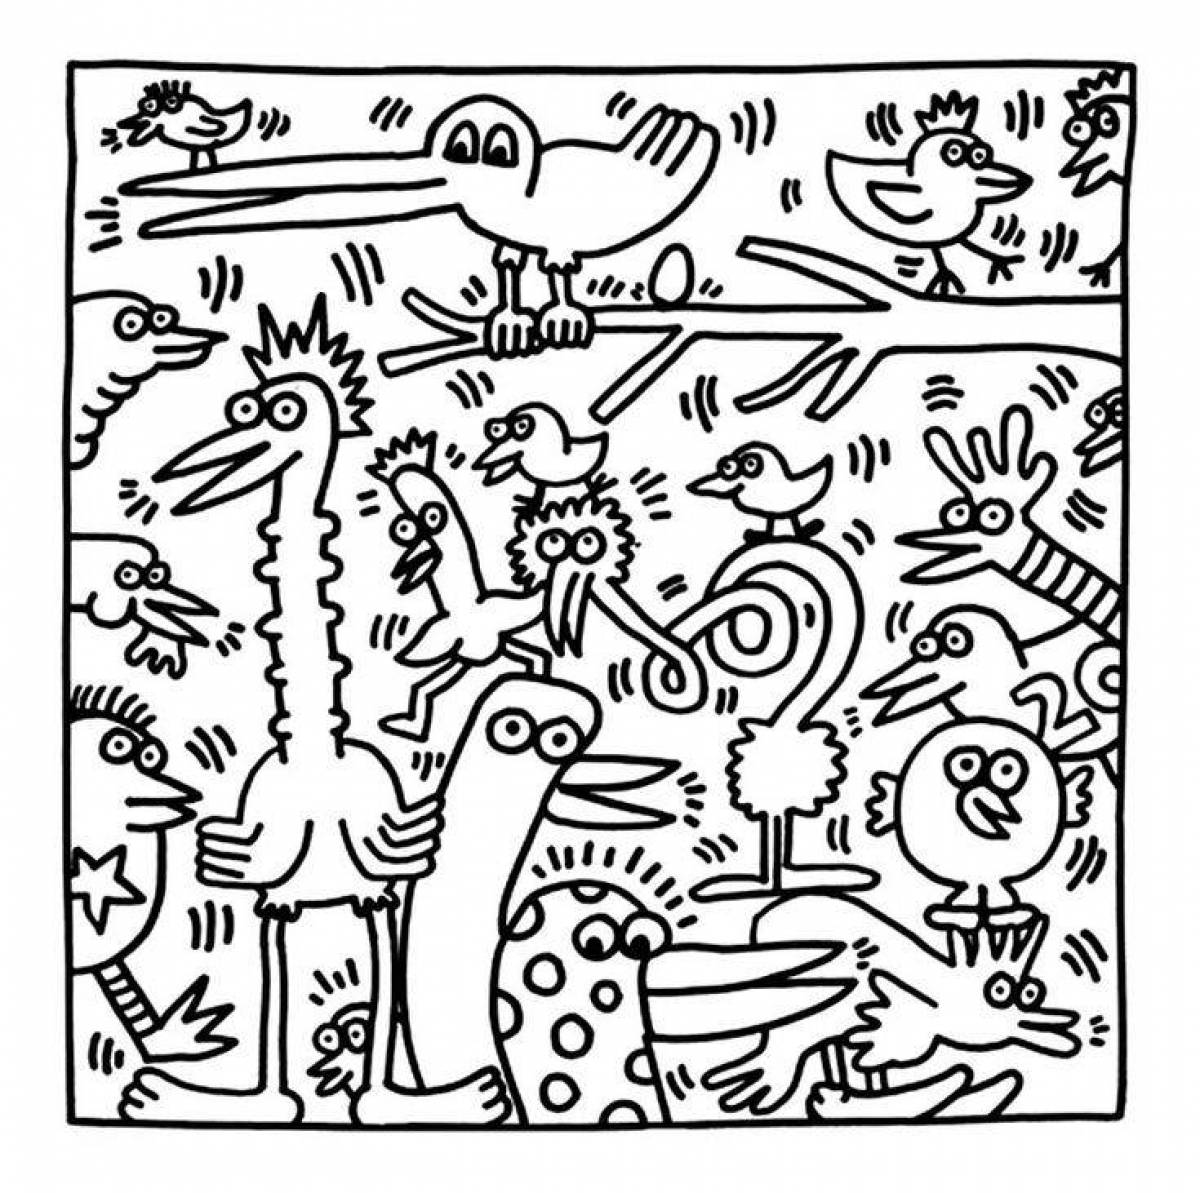 Coloring-puzzlement coloring page wall indie kid